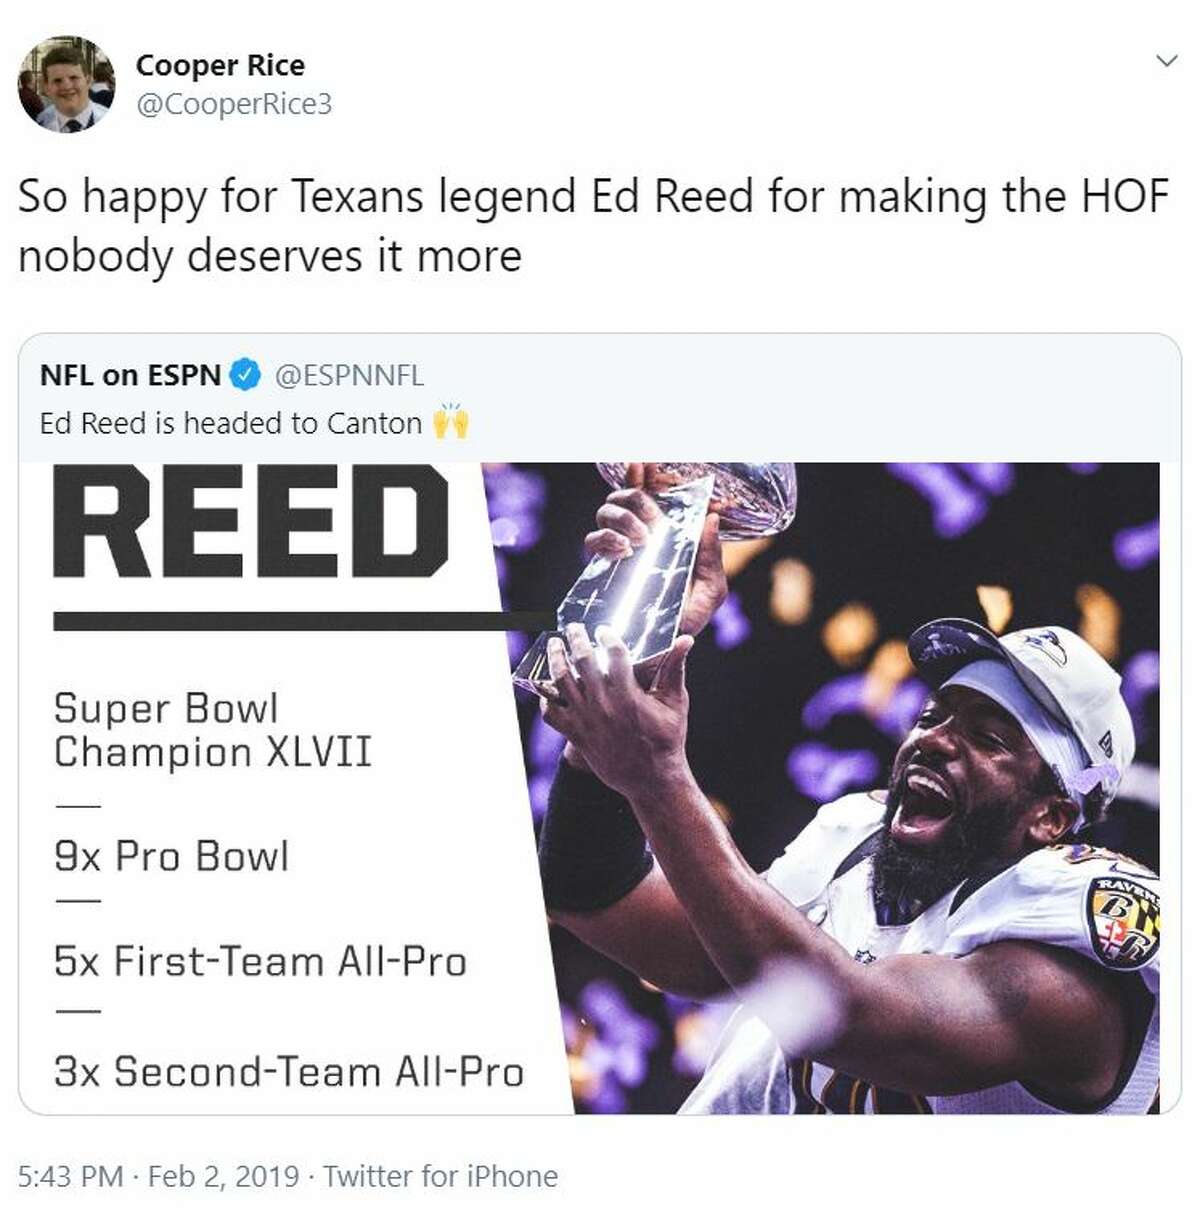 "So happy for Texans legend Ed Reed for making the HOF nobody deserves it more" - @CooperRice3